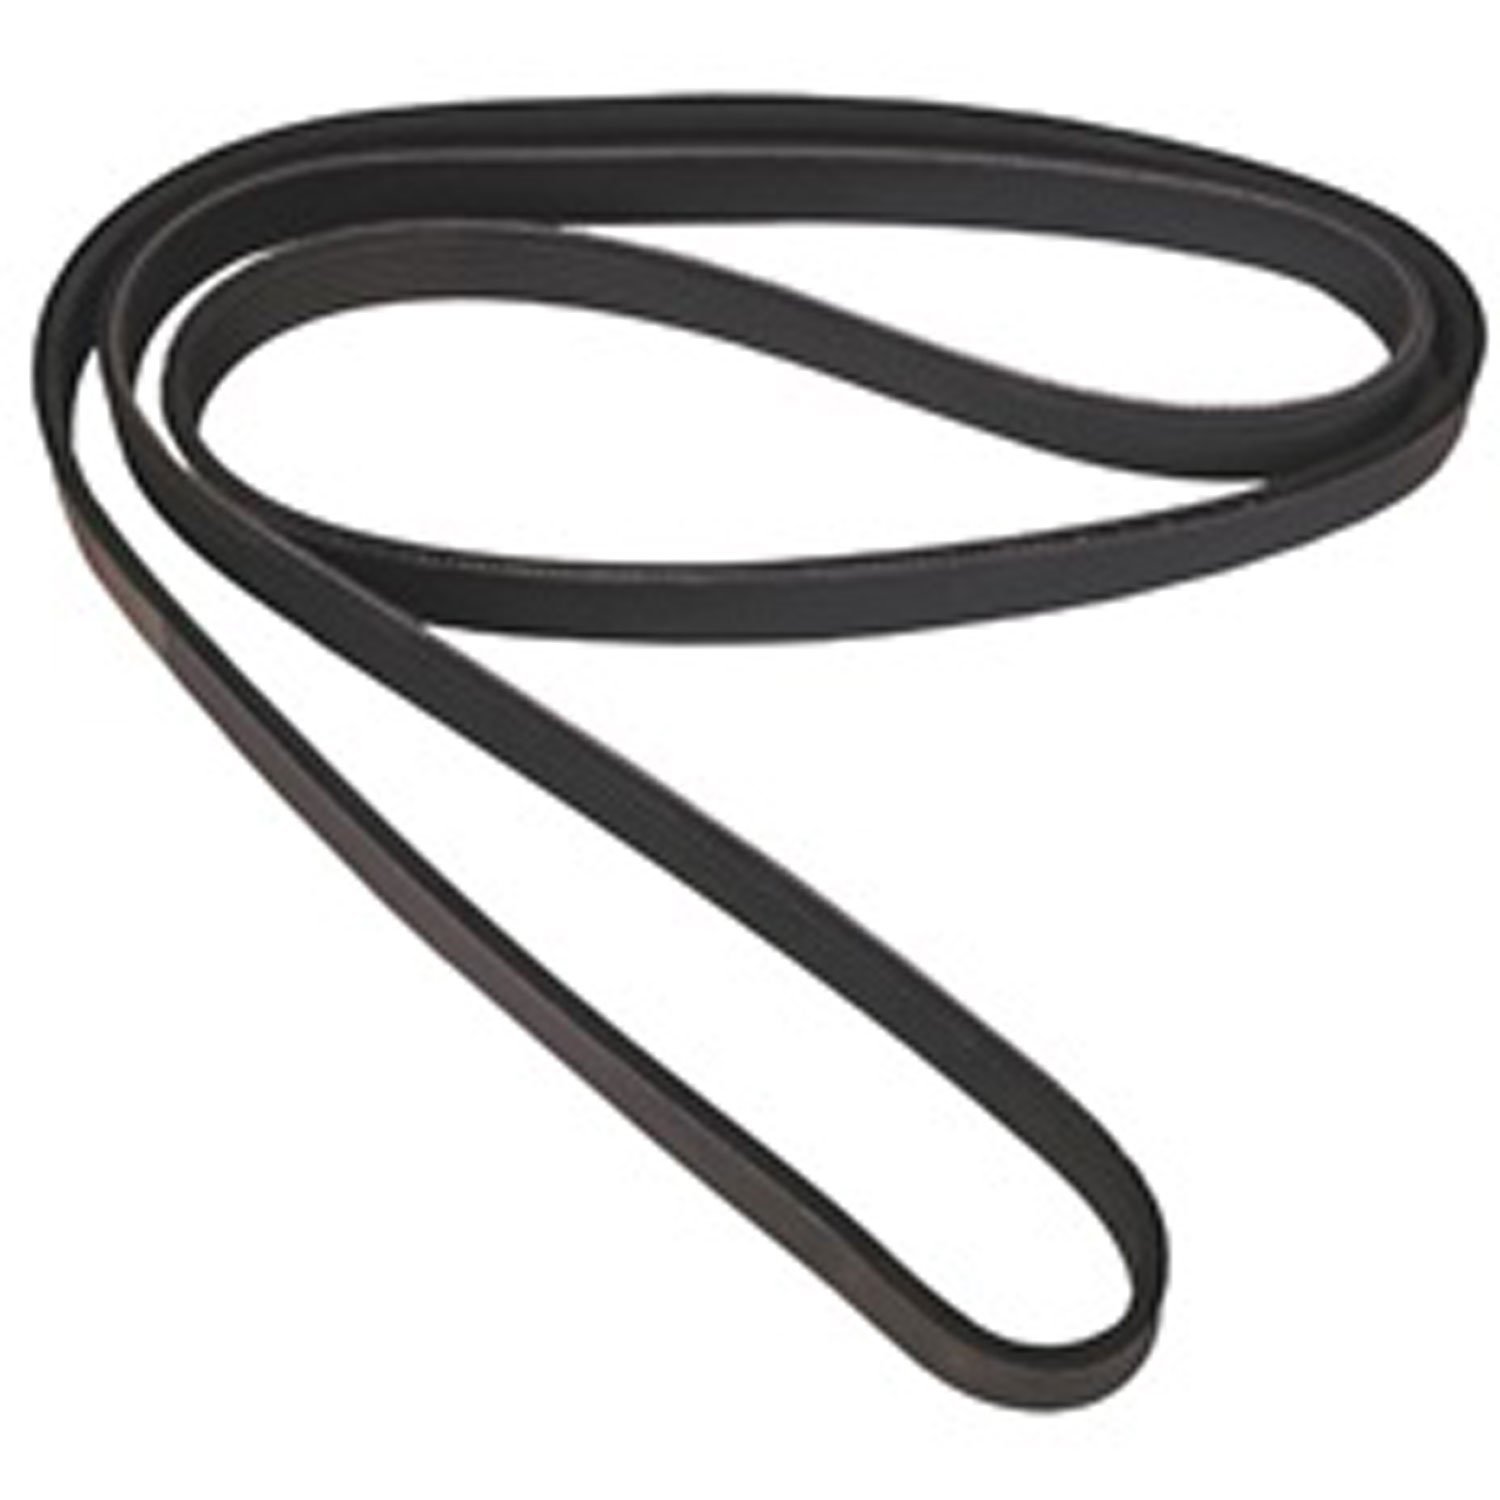 Replacement serpentine belt from Omix-ADA, Fits 00-06 Jeep Wrangler TJ with 4.0 liter engine